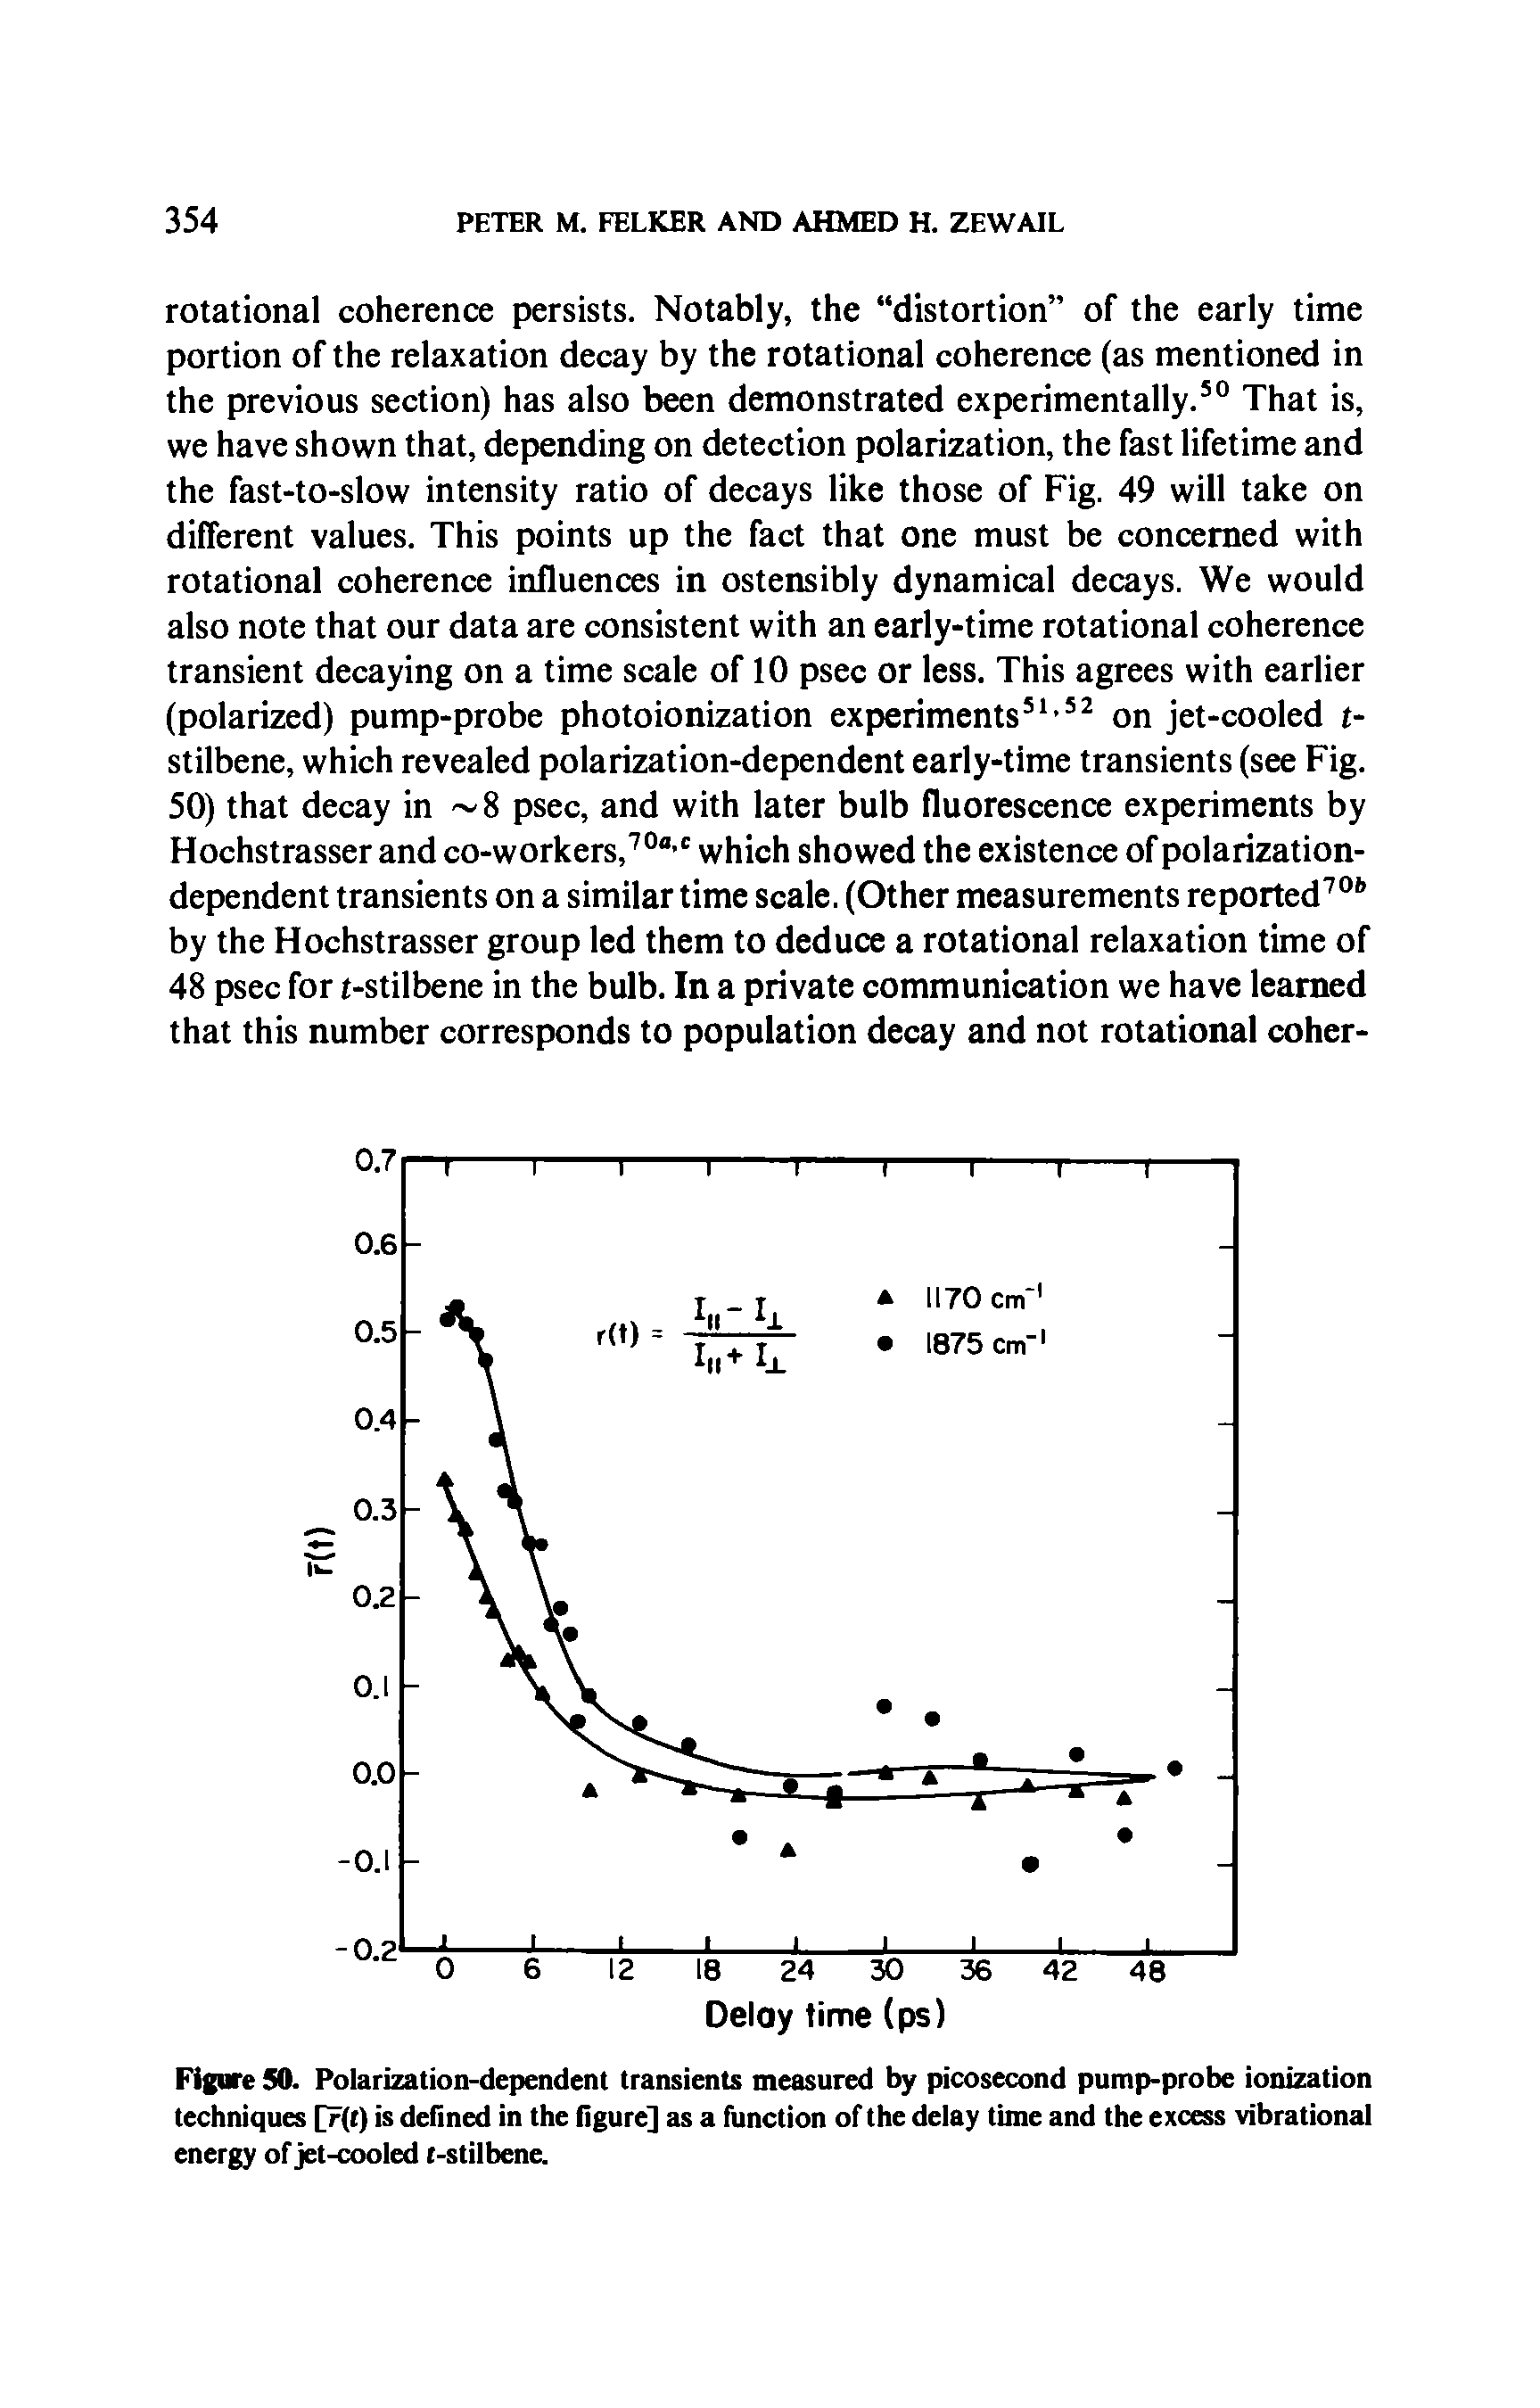 Figure SO. Polarization-dependent transients measured by picosecond pump-probe ionization techniques [r(c) is defined in the figure] as a function of the delay time and the excess vibrational energy of jet-cooled c-stilbene.